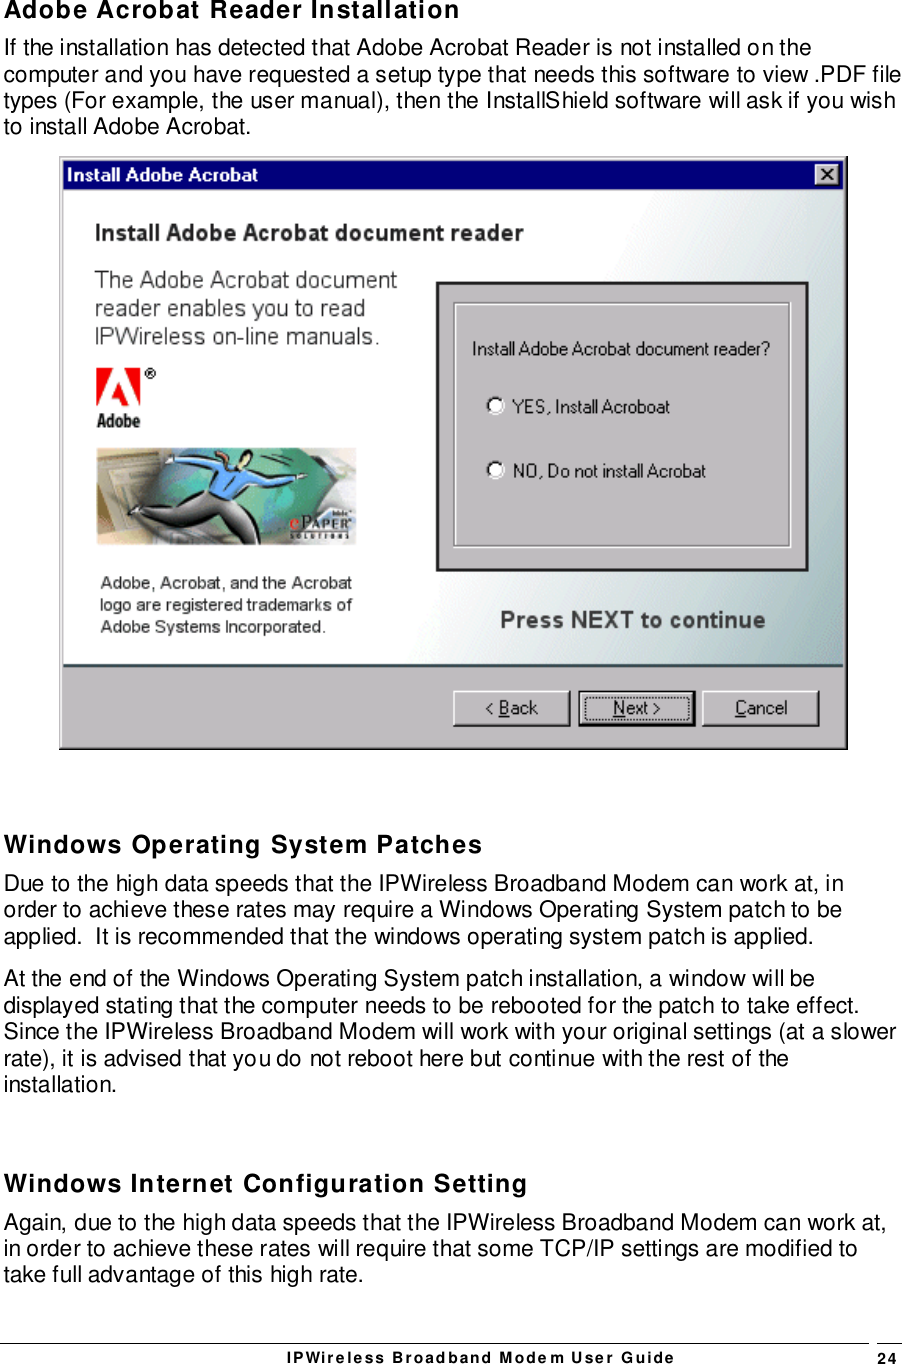 IPWireless Broadband Modem User Guide 24Adobe Acrobat Reader InstallationIf the installation has detected that Adobe Acrobat Reader is not installed on thecomputer and you have requested a setup type that needs this software to view .PDF filetypes (For example, the user manual), then the InstallShield software will ask if you wishto install Adobe Acrobat.Windows Operating System PatchesDue to the high data speeds that the IPWireless Broadband Modem can work at, inorder to achieve these rates may require a Windows Operating System patch to beapplied.  It is recommended that the windows operating system patch is applied.At the end of the Windows Operating System patch installation, a window will bedisplayed stating that the computer needs to be rebooted for the patch to take effect.Since the IPWireless Broadband Modem will work with your original settings (at a slowerrate), it is advised that you do not reboot here but continue with the rest of theinstallation.Windows Internet Configuration SettingAgain, due to the high data speeds that the IPWireless Broadband Modem can work at,in order to achieve these rates will require that some TCP/IP settings are modified totake full advantage of this high rate.